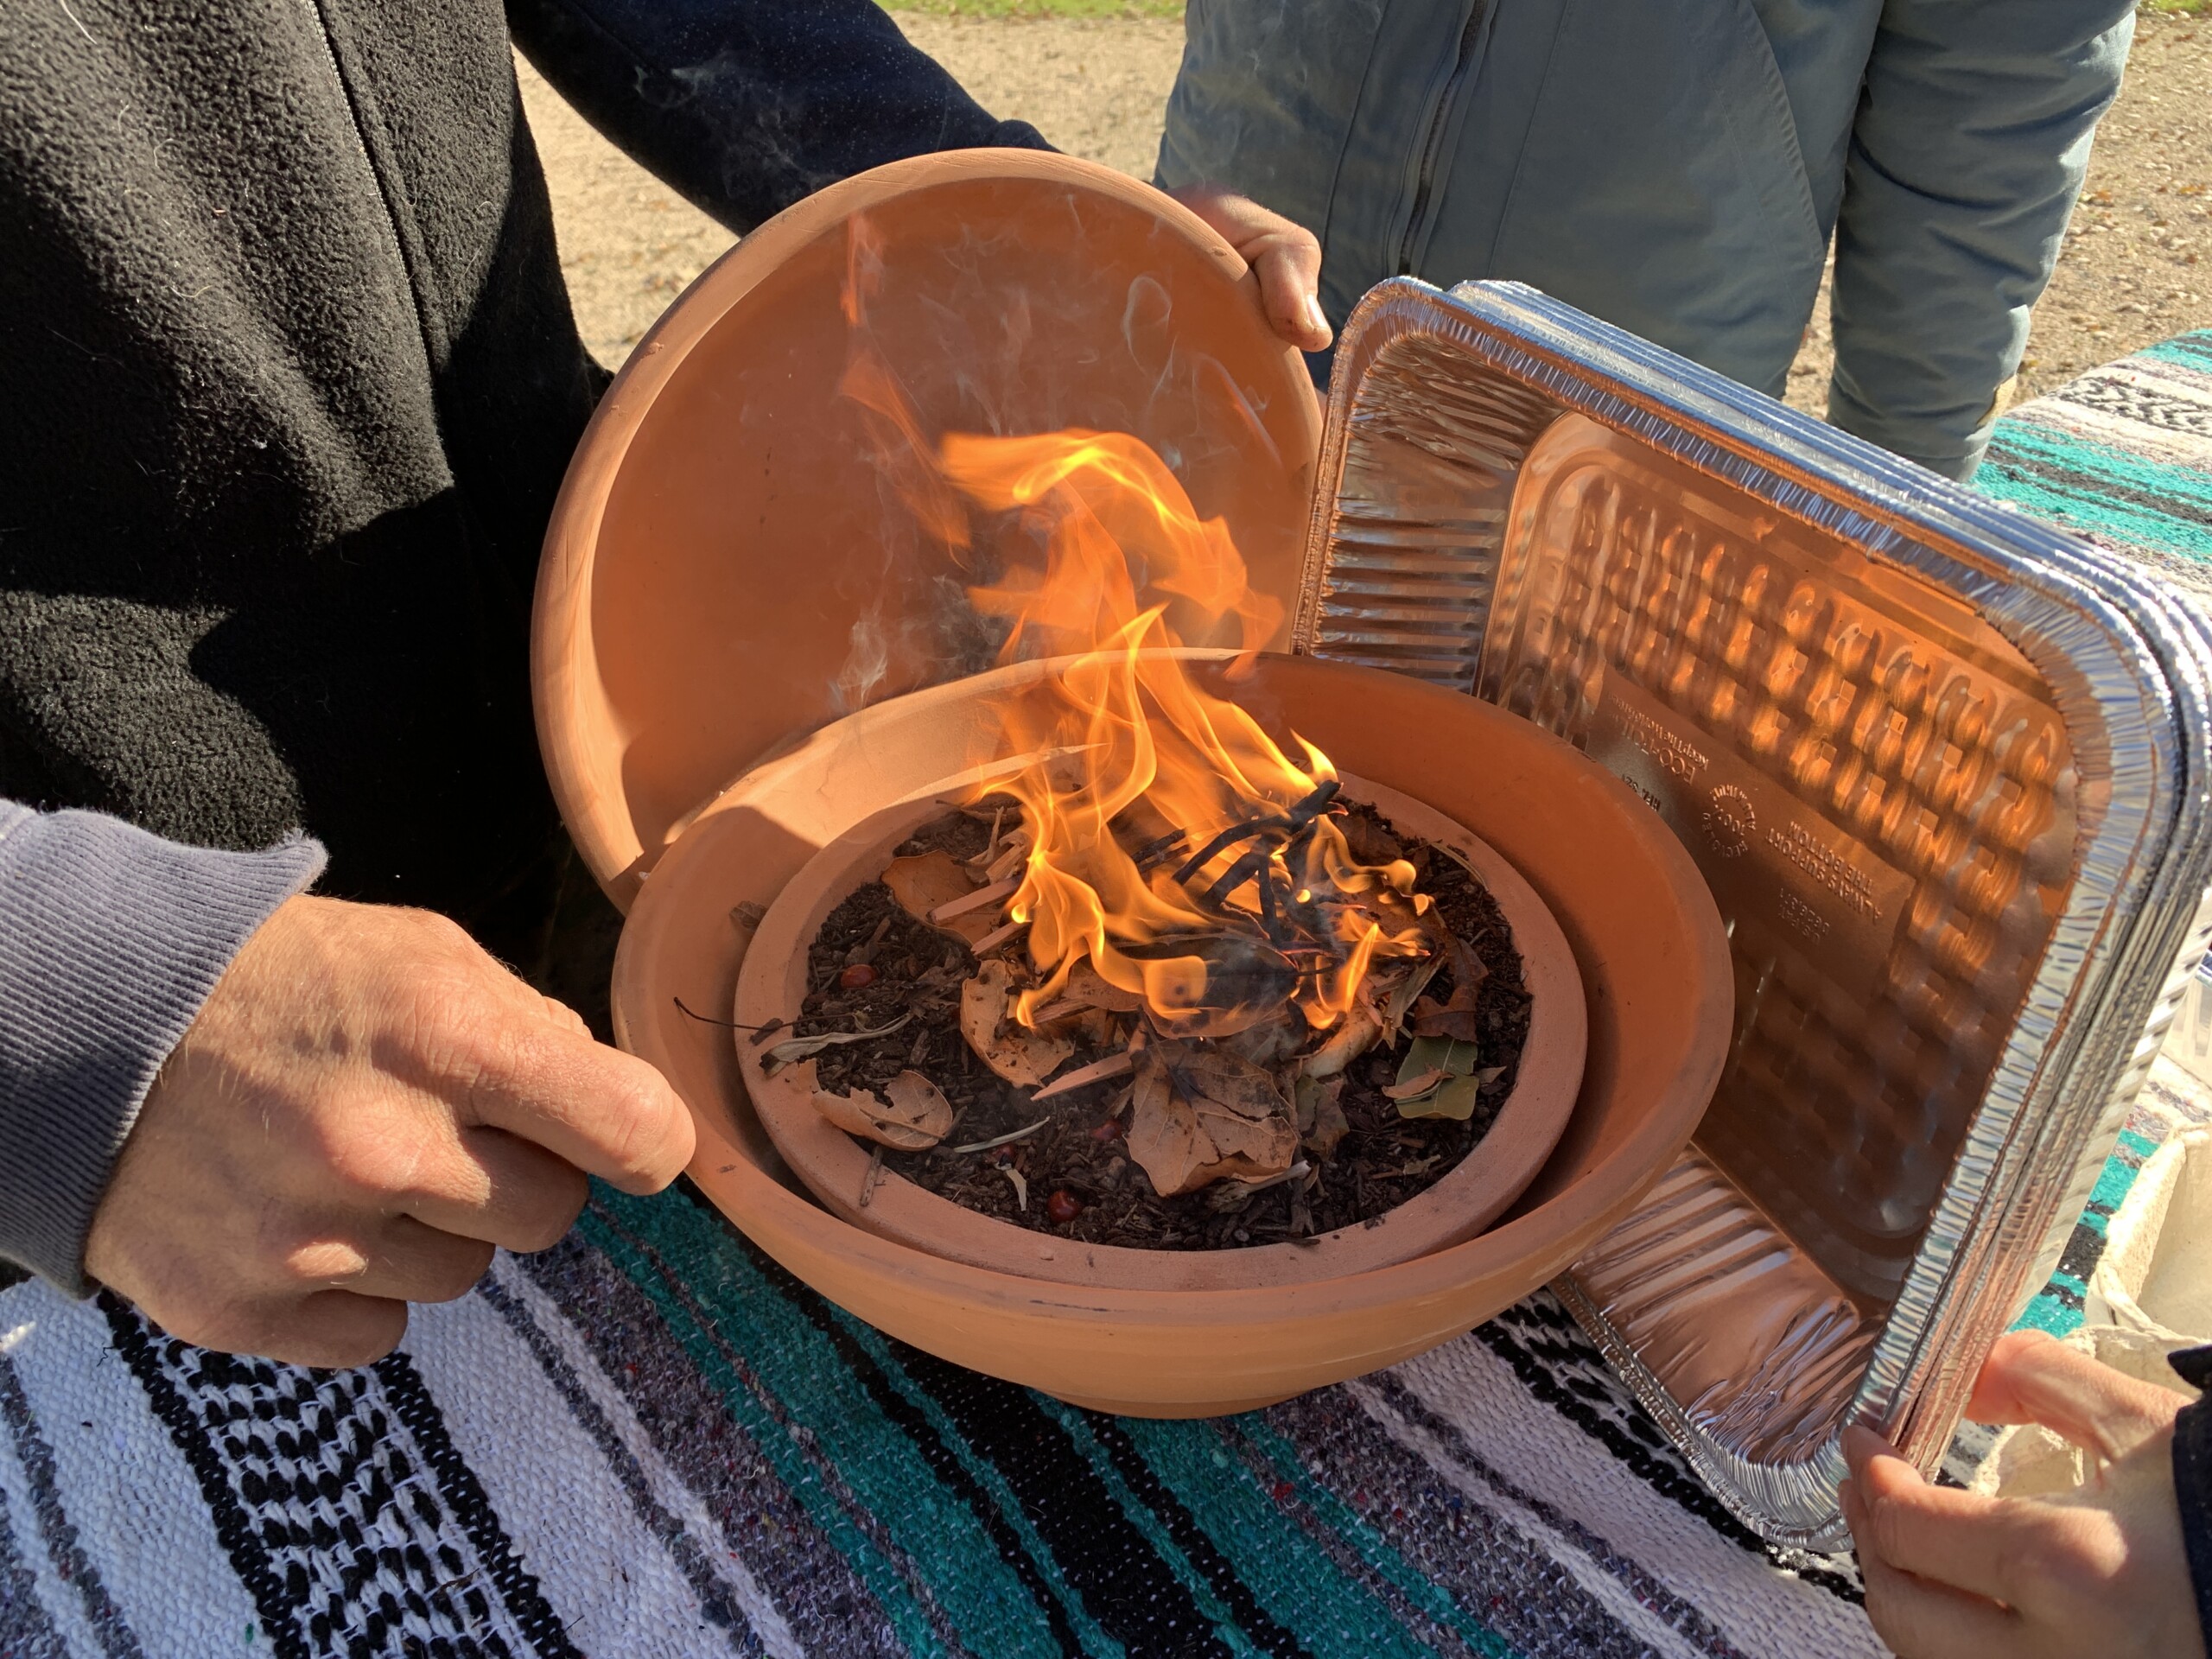 A small protected flame burning in a clay pot